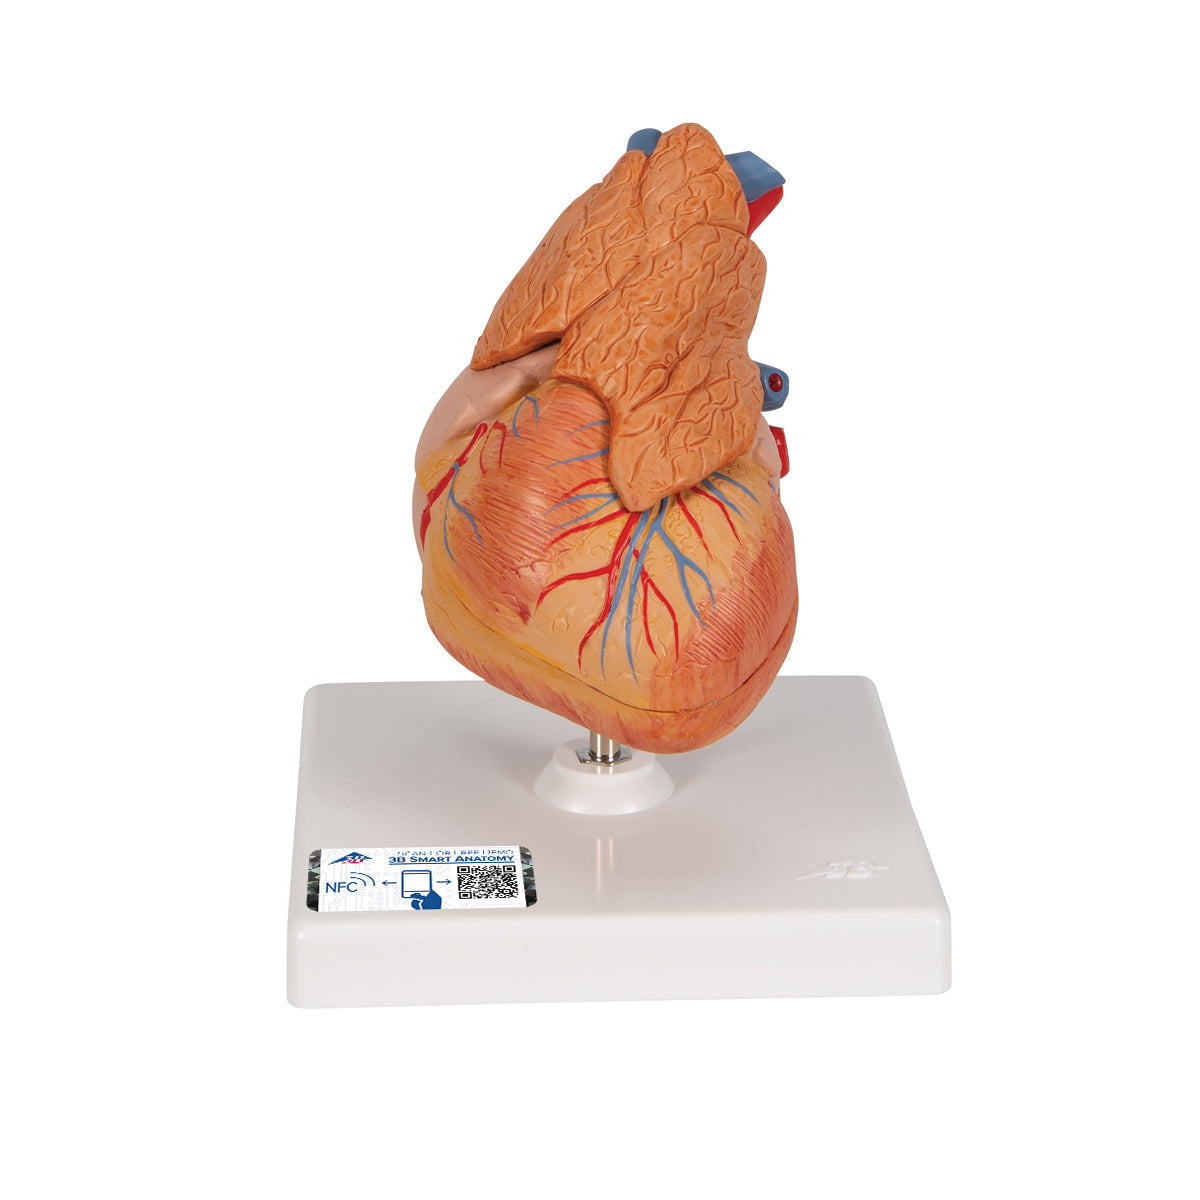 Reduced heart model including thymus